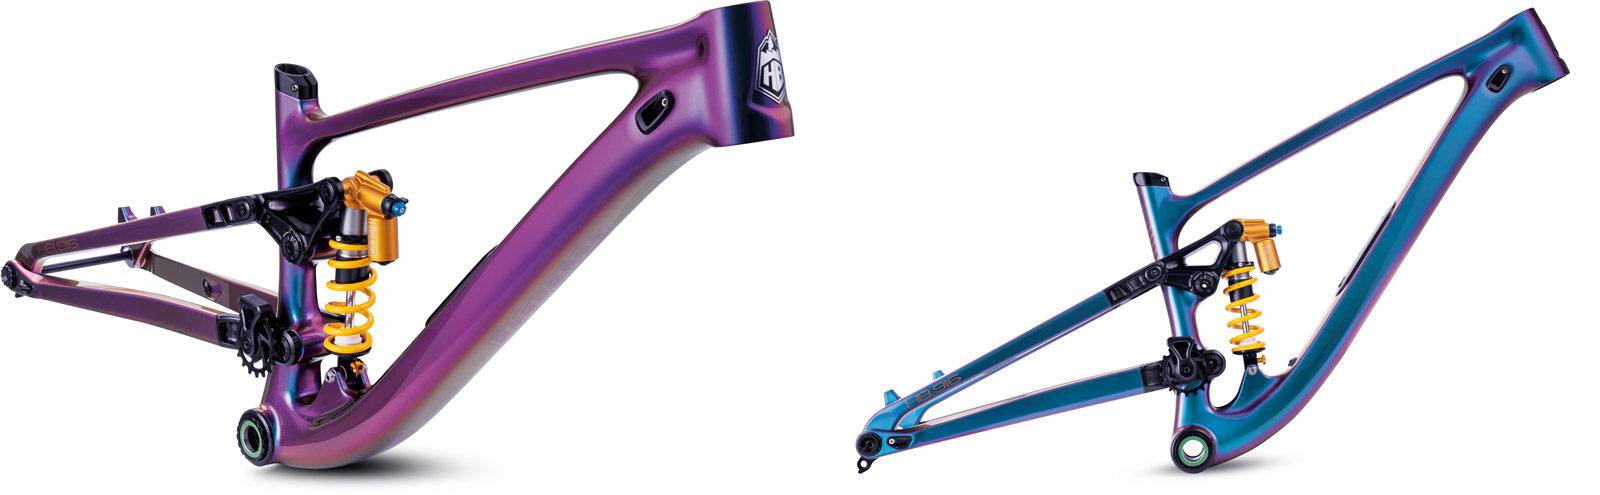 hope hb 916 chameleon frame two colors different angles